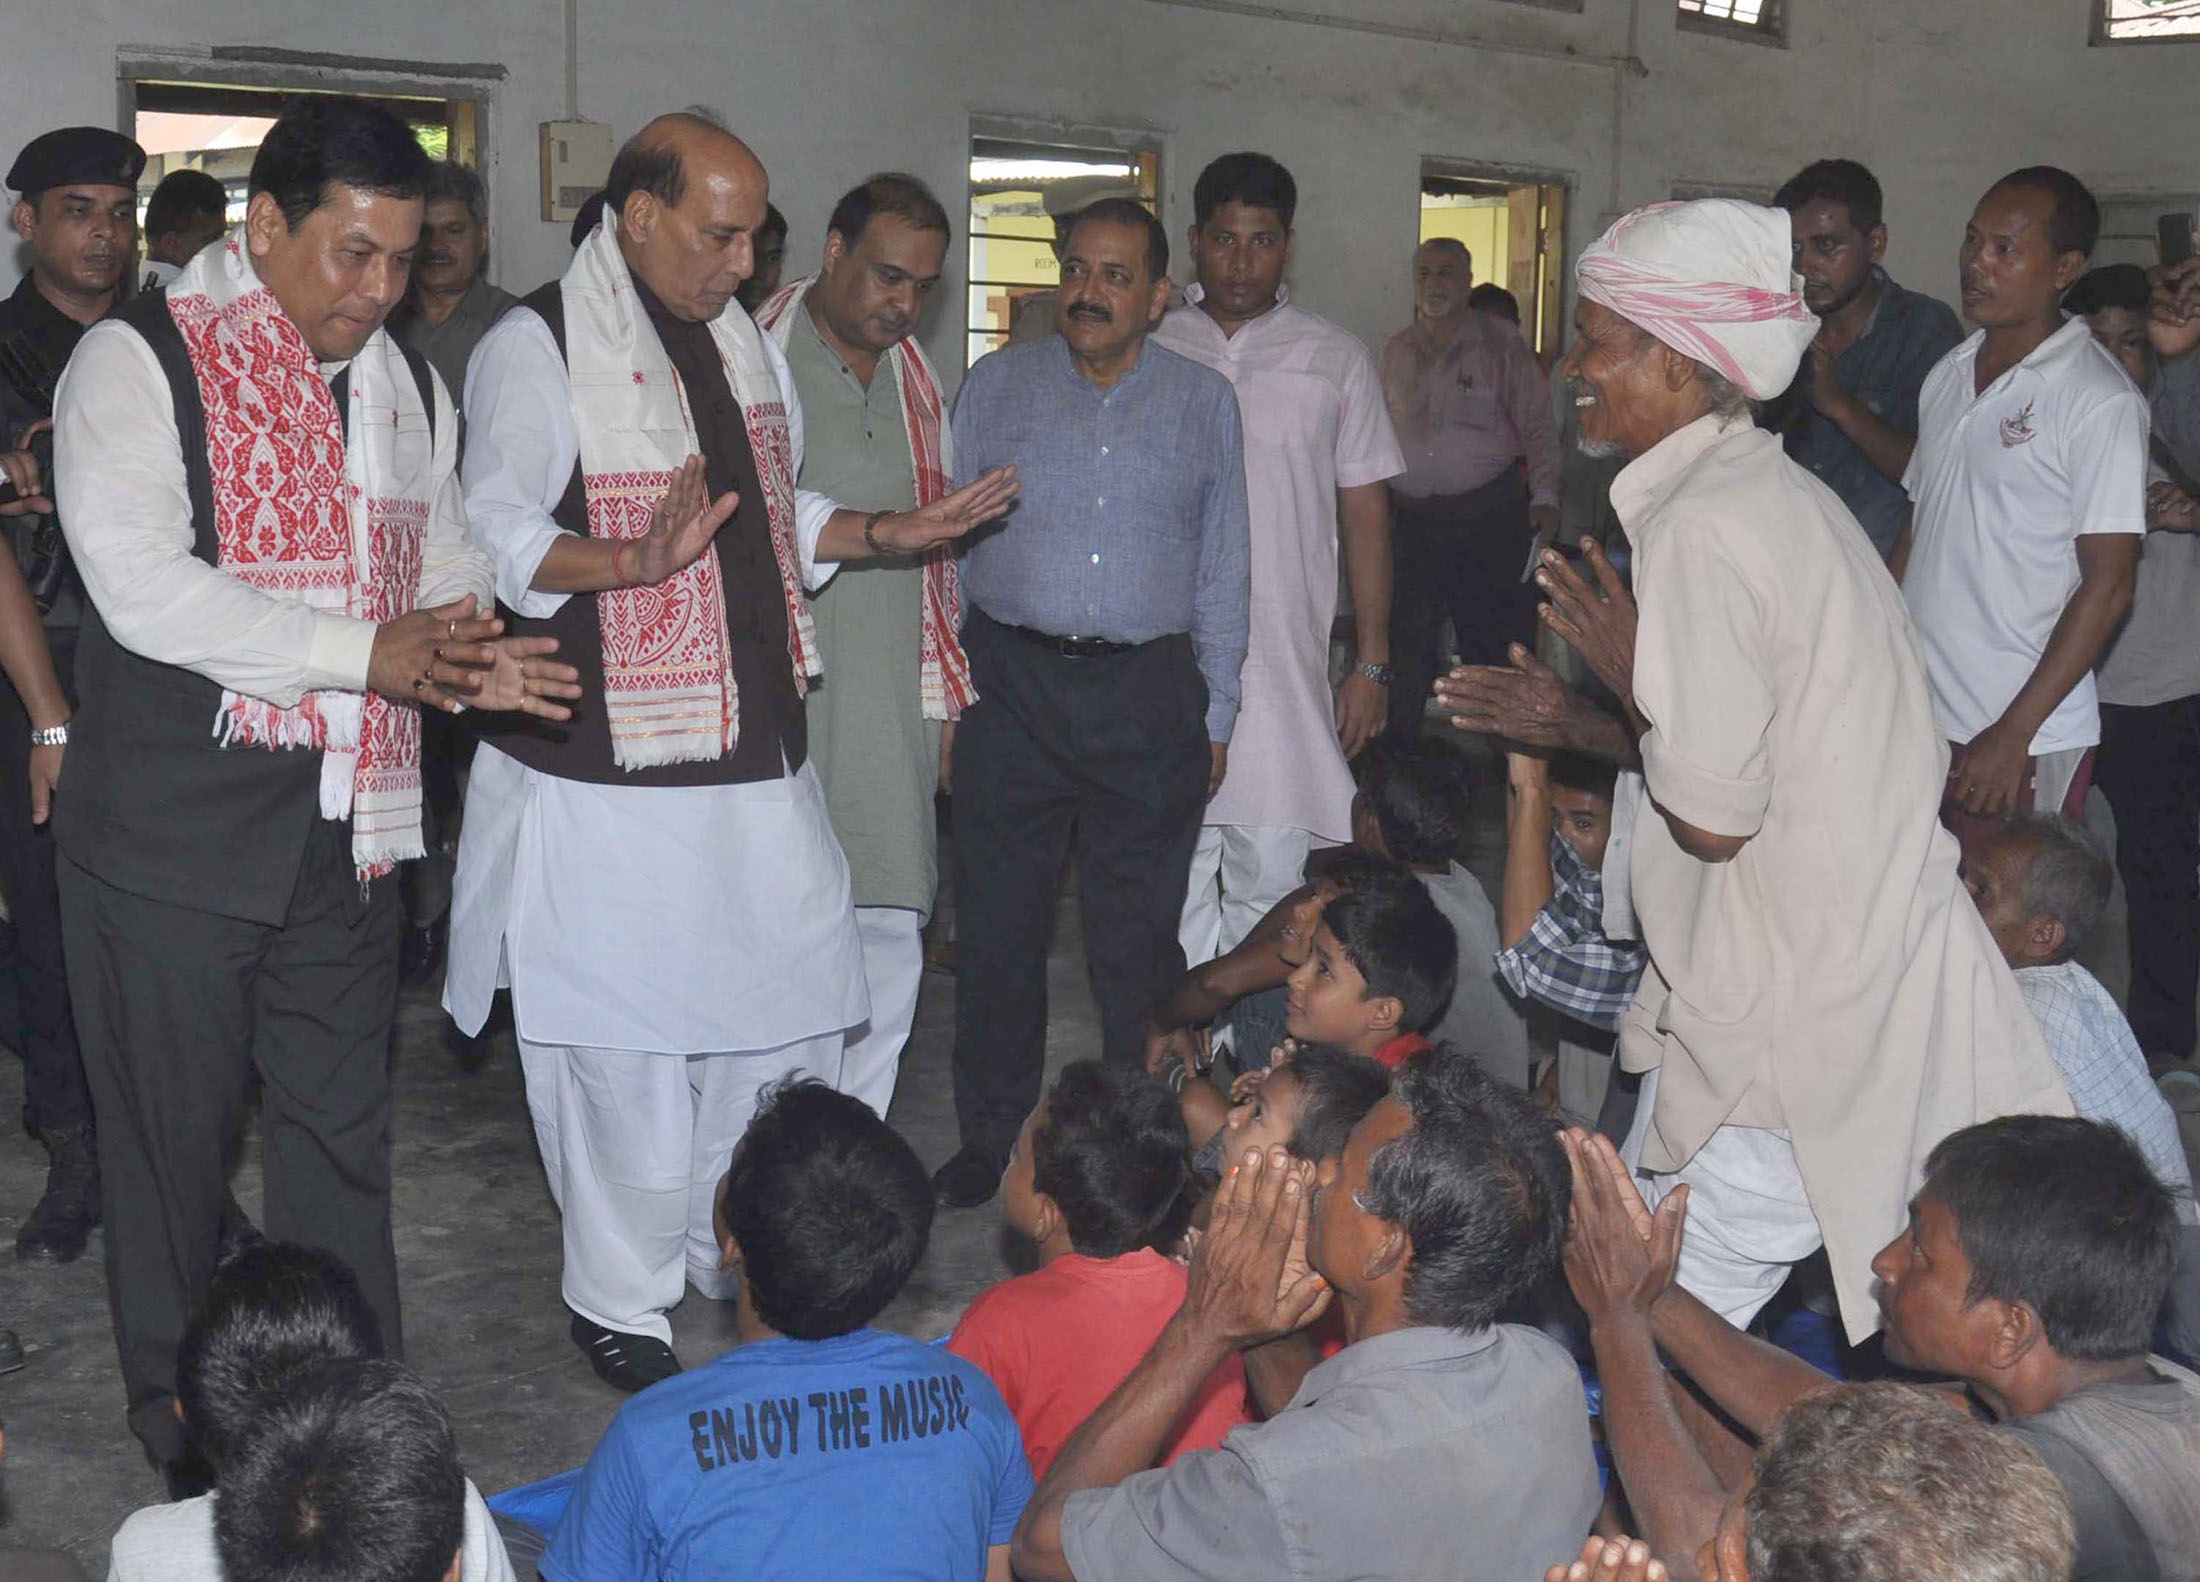 The Union Home Minister, Shri Rajnath Singh visiting the flood relive camp, at Morigaon, District of Assam on July 30, 2016. 	The Chief Minister of Assam, Shri Sarbananda Sonowal and the Minister of State for Development of North Eastern Region (I/C), Prime Ministers Office, Personnel, Public Grievances & Pensions, Atomic Energy and Space, Dr. Jitendra Singh are also seen.